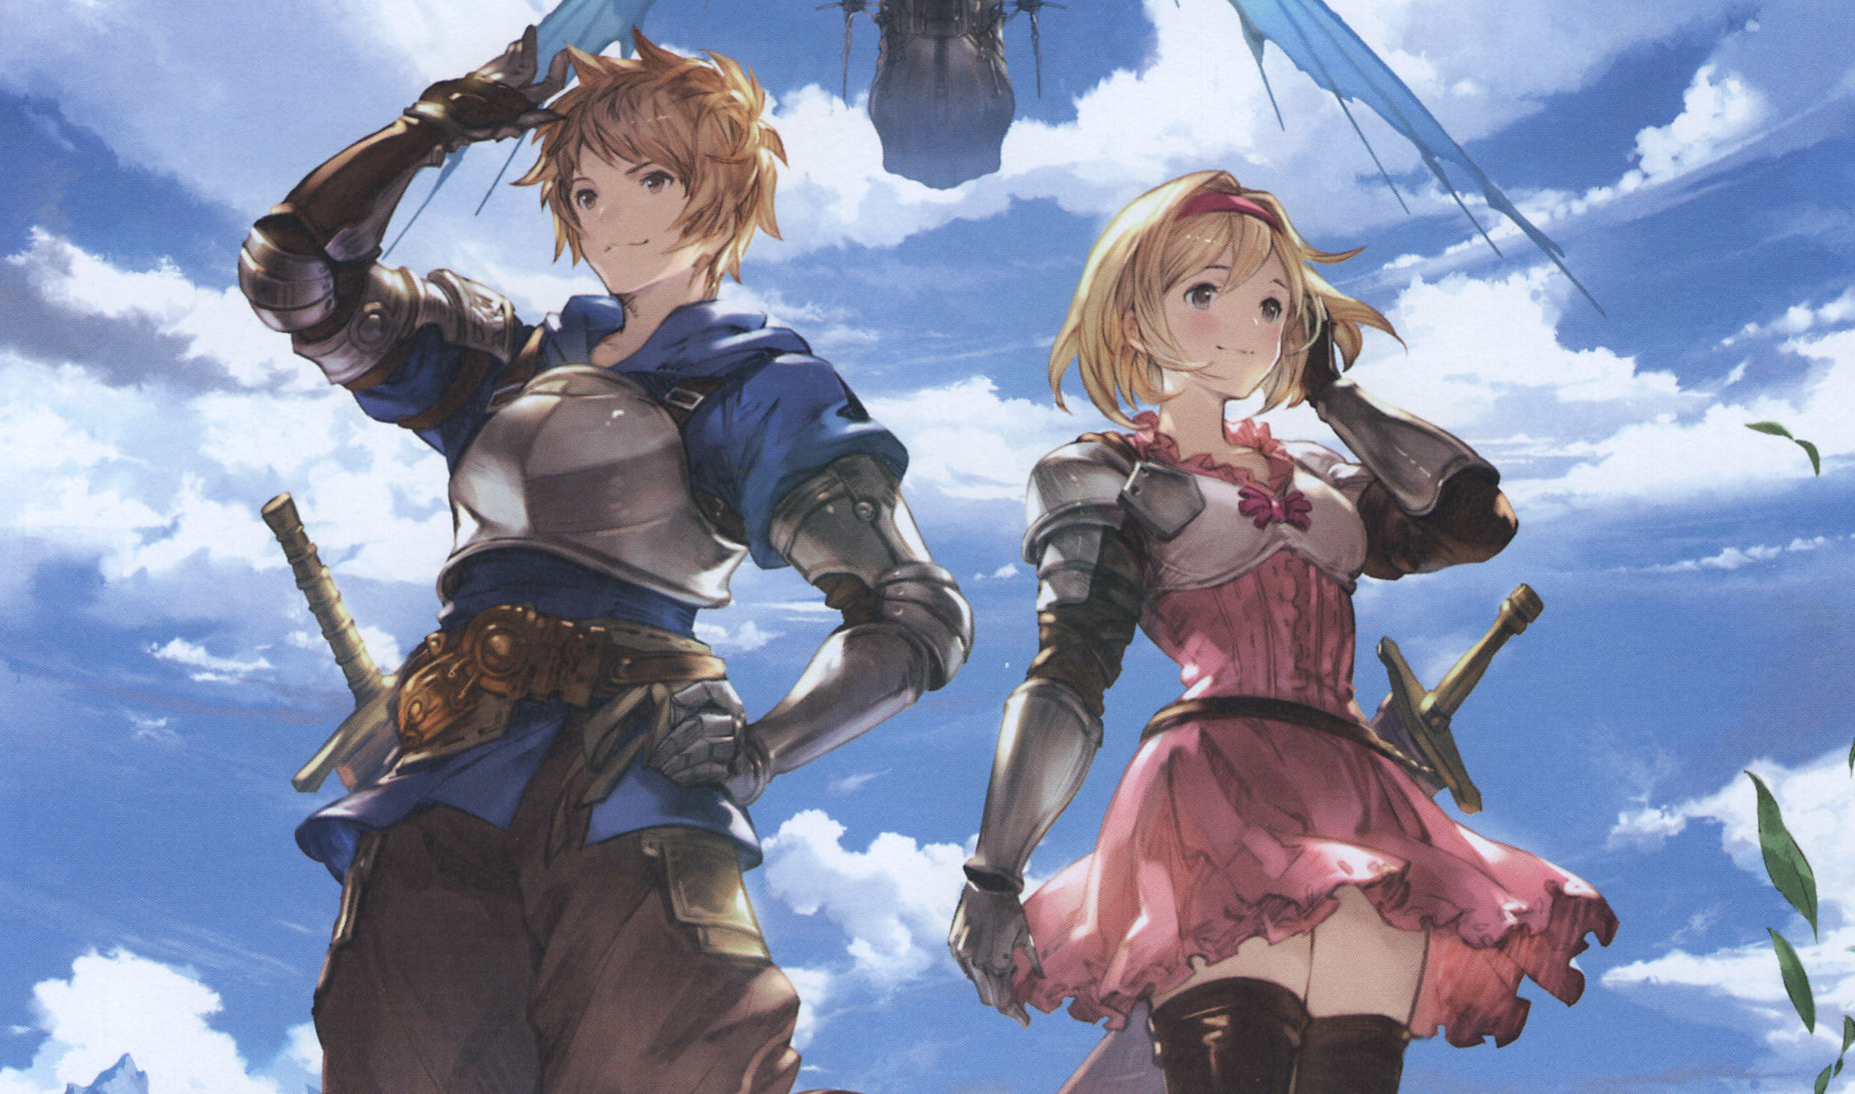 I'm really excited for Granblue Versus but I would rather have Djeeta as the cover character